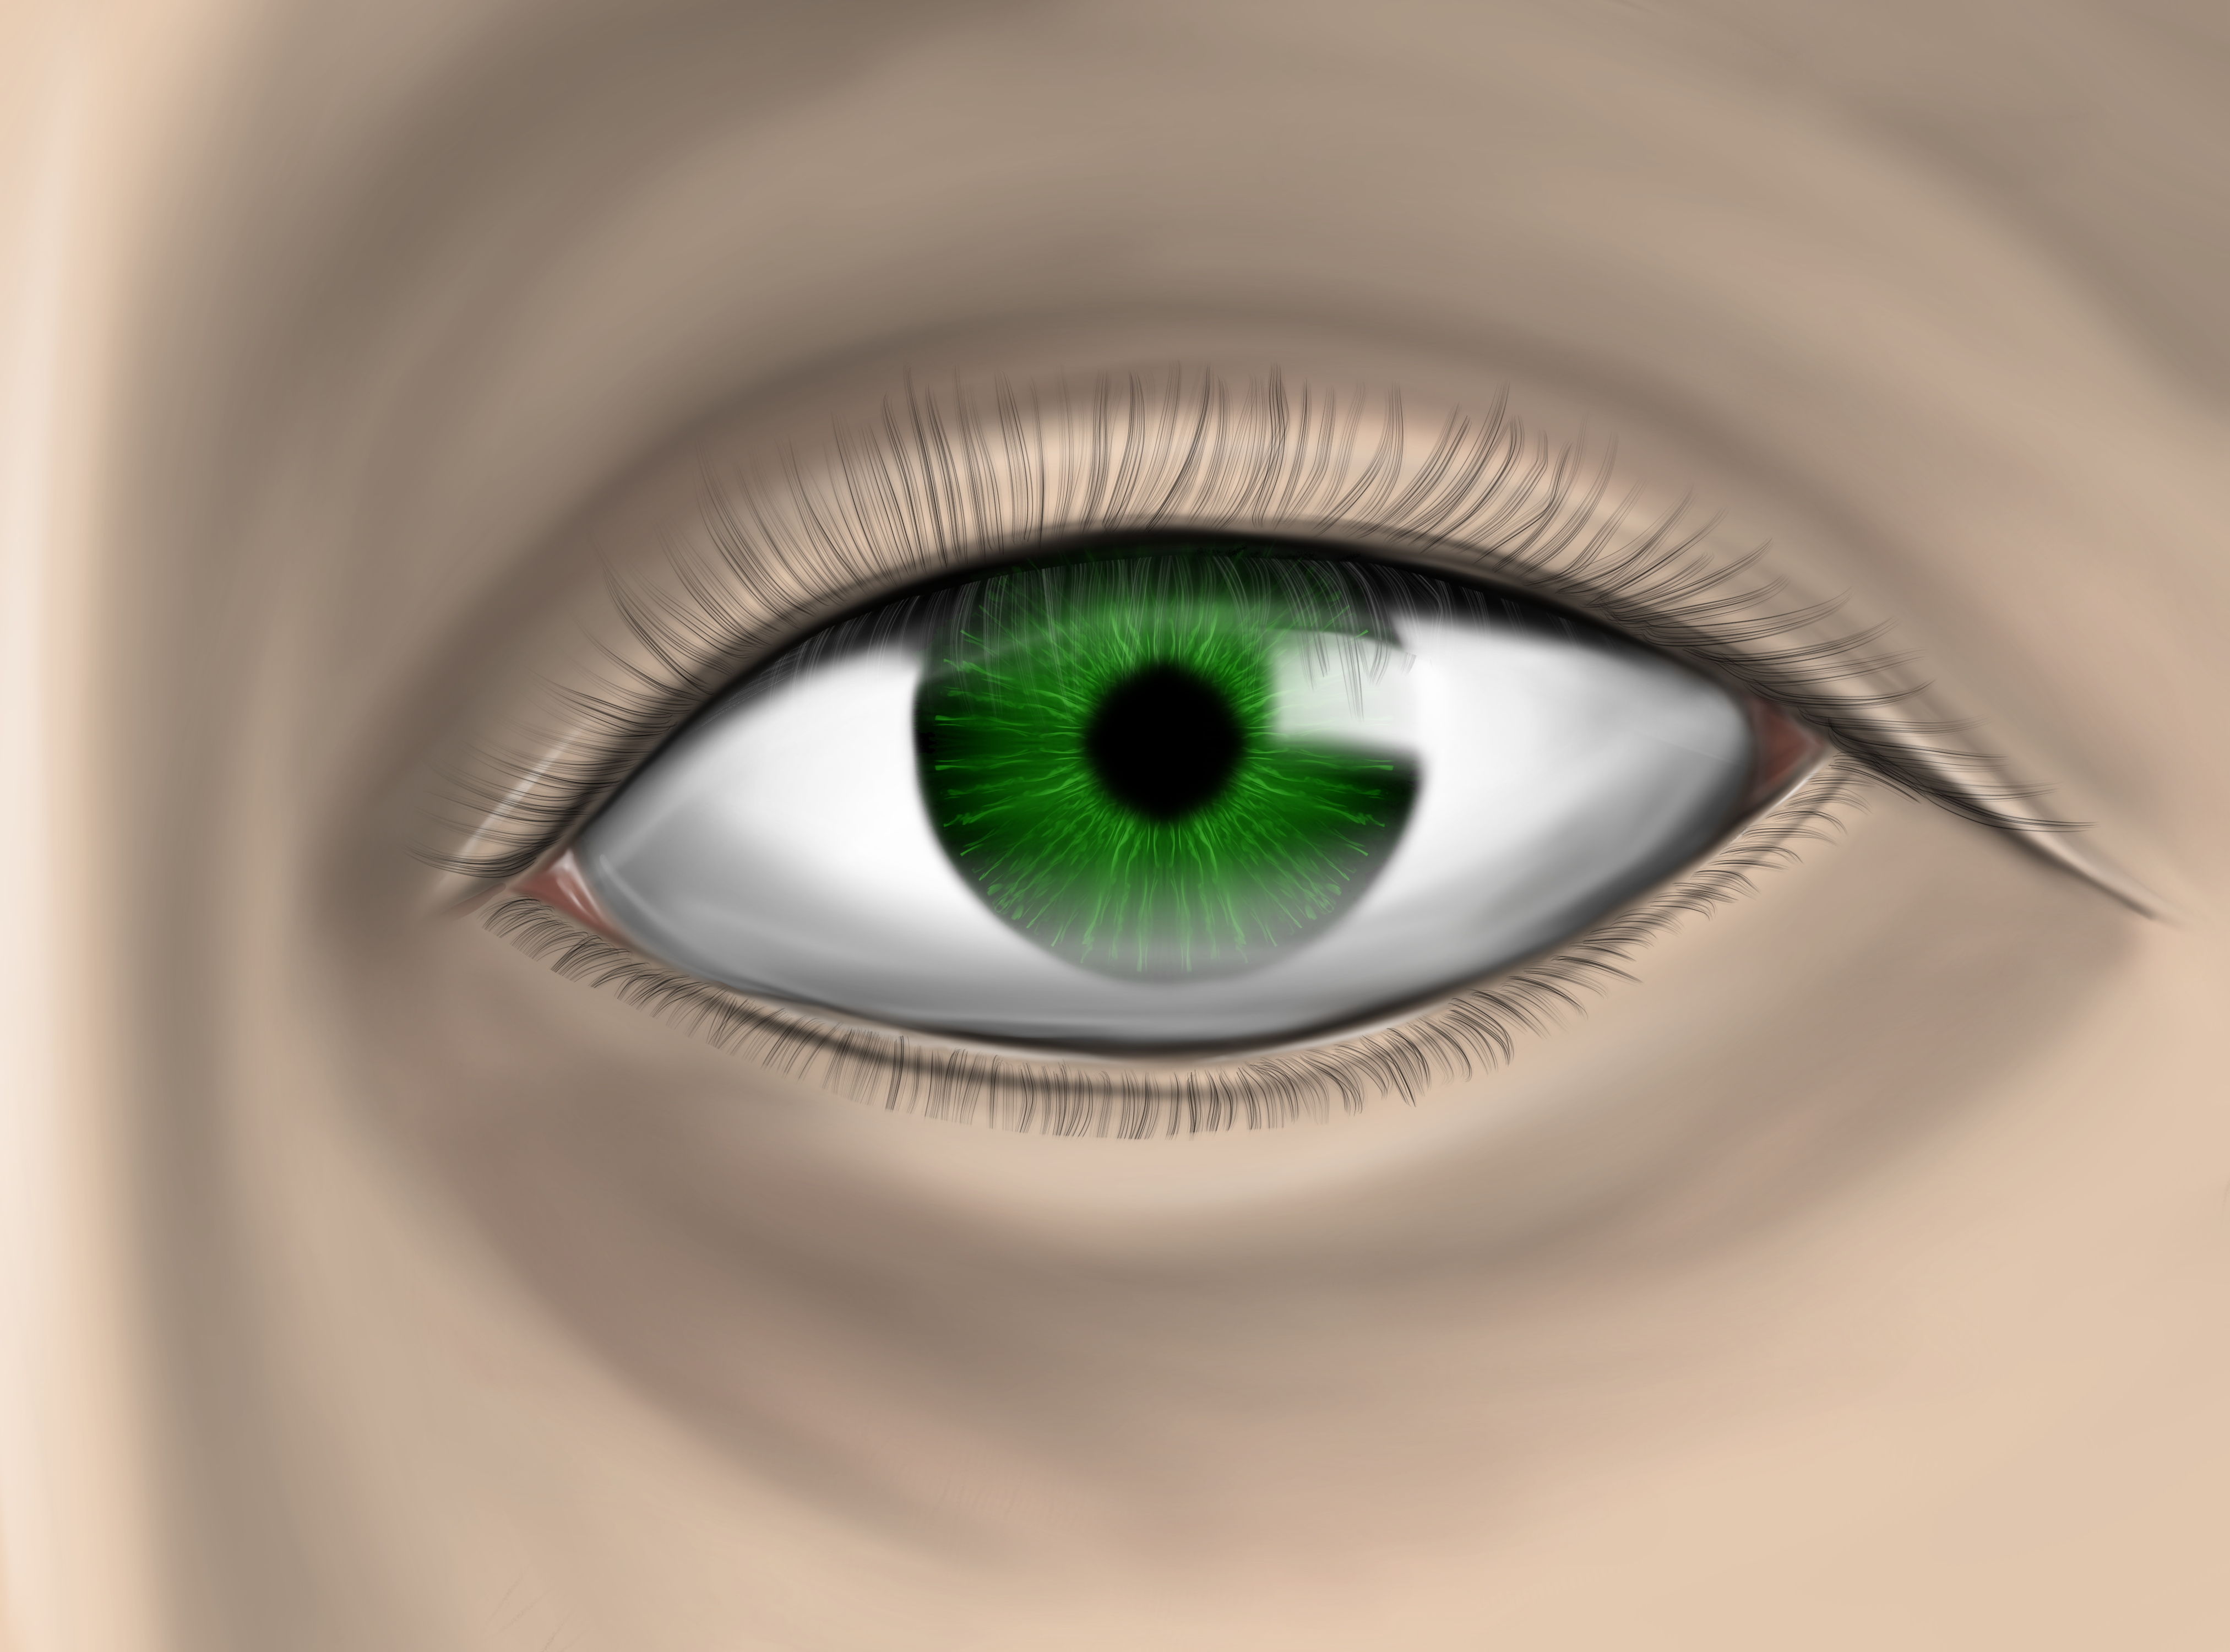 Ah the old 'I know Art' fallback, drawing an eye. This one was an exercise in pencils and then after I tried incorporating skin tones using underpainting, turns out pencil shading and oils don't actually mesh in a digital medium.